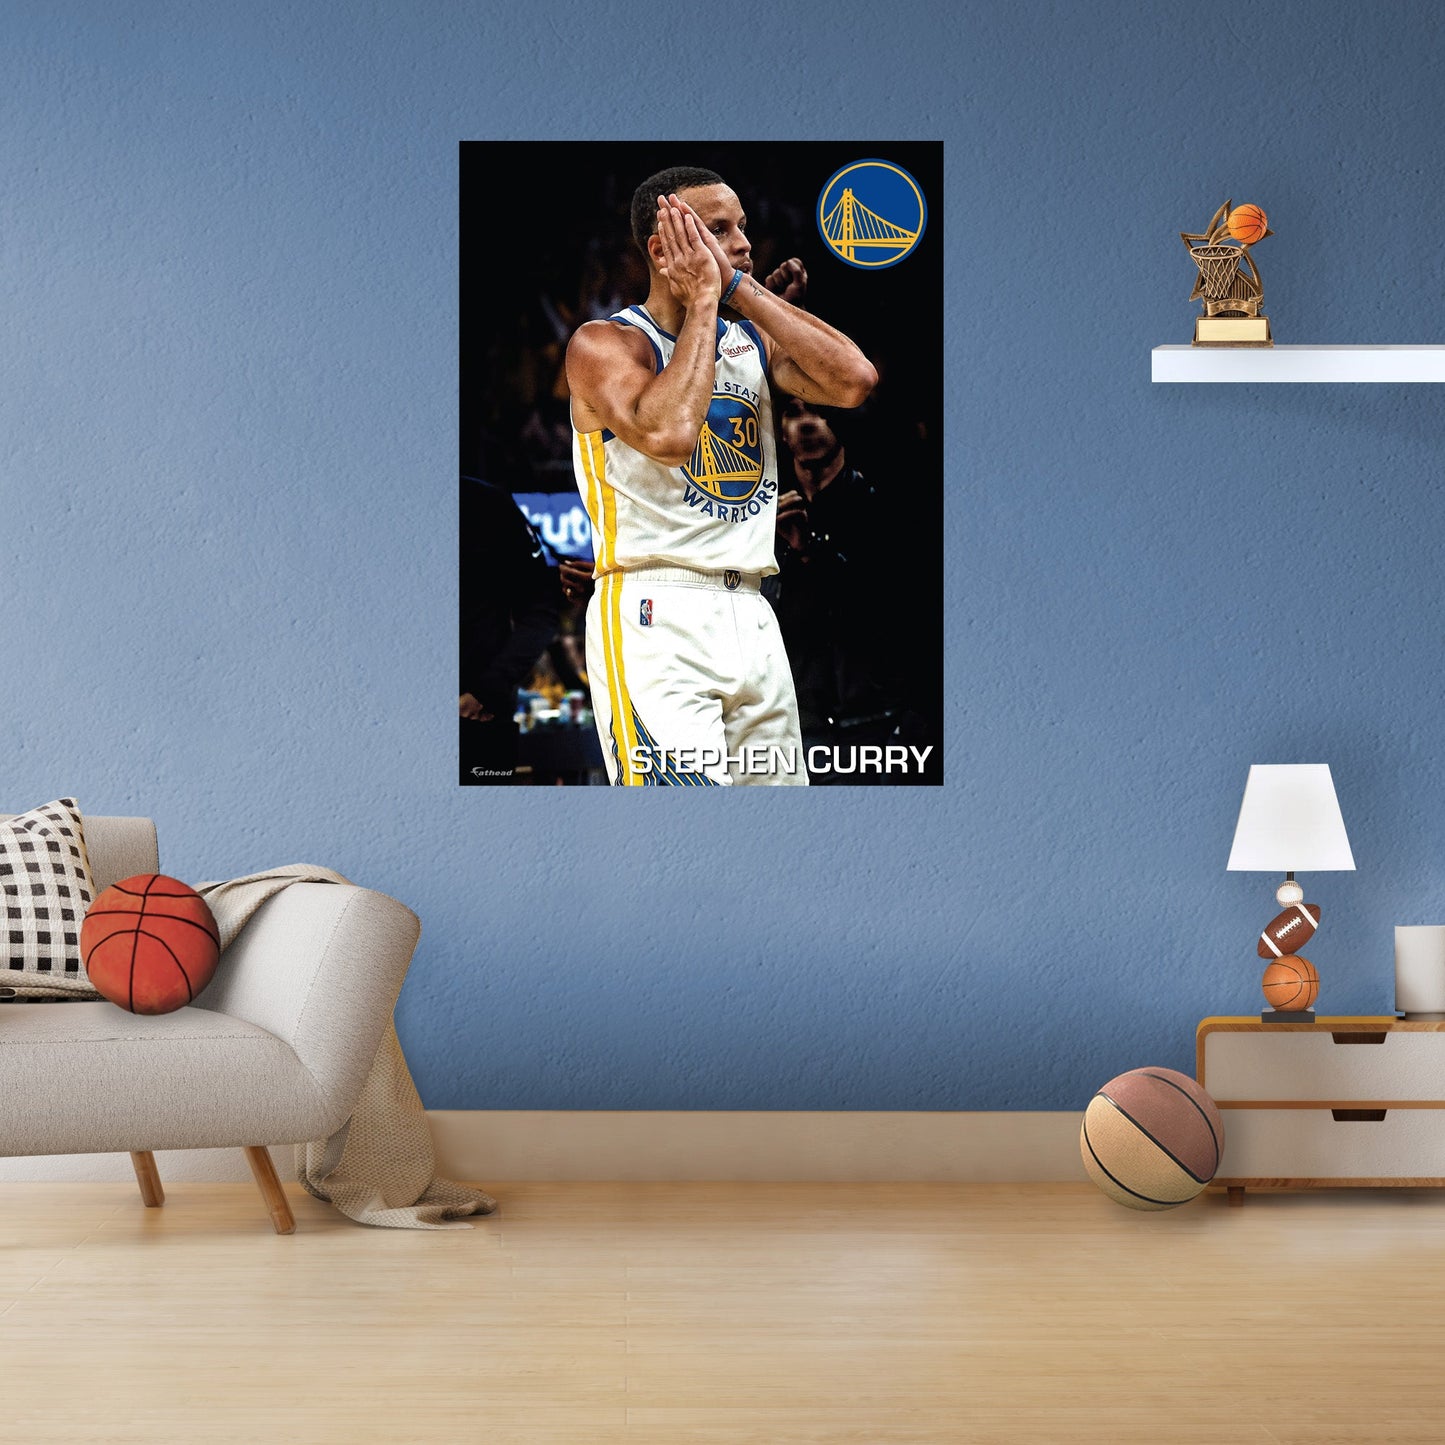 Golden State Warriors: Stephen Curry Night Night Poster - Officially Licensed NBA Removable Adhesive Decal